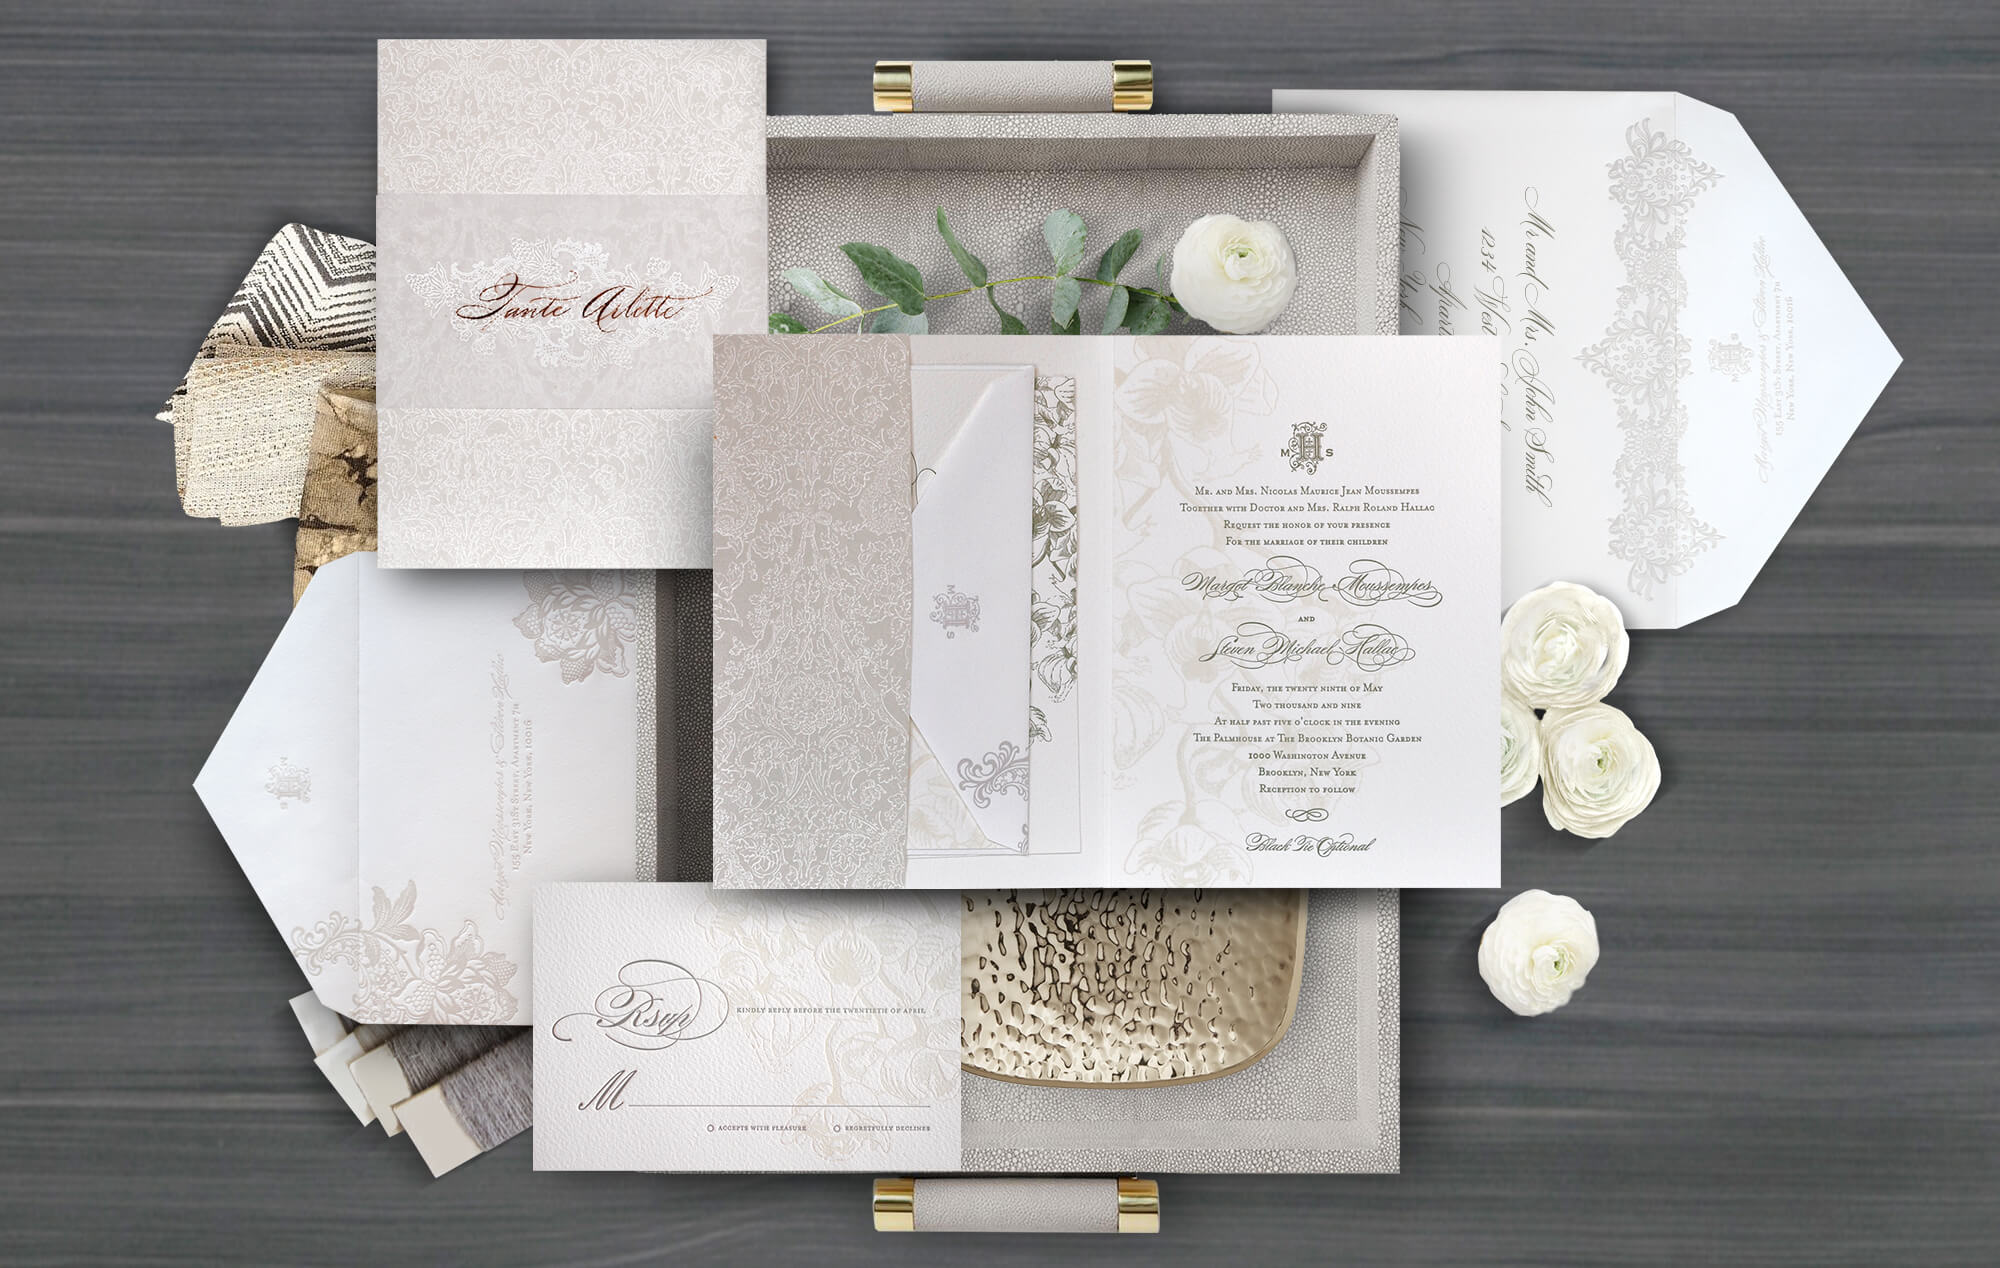 Floral and lace letterpress wedding invitation